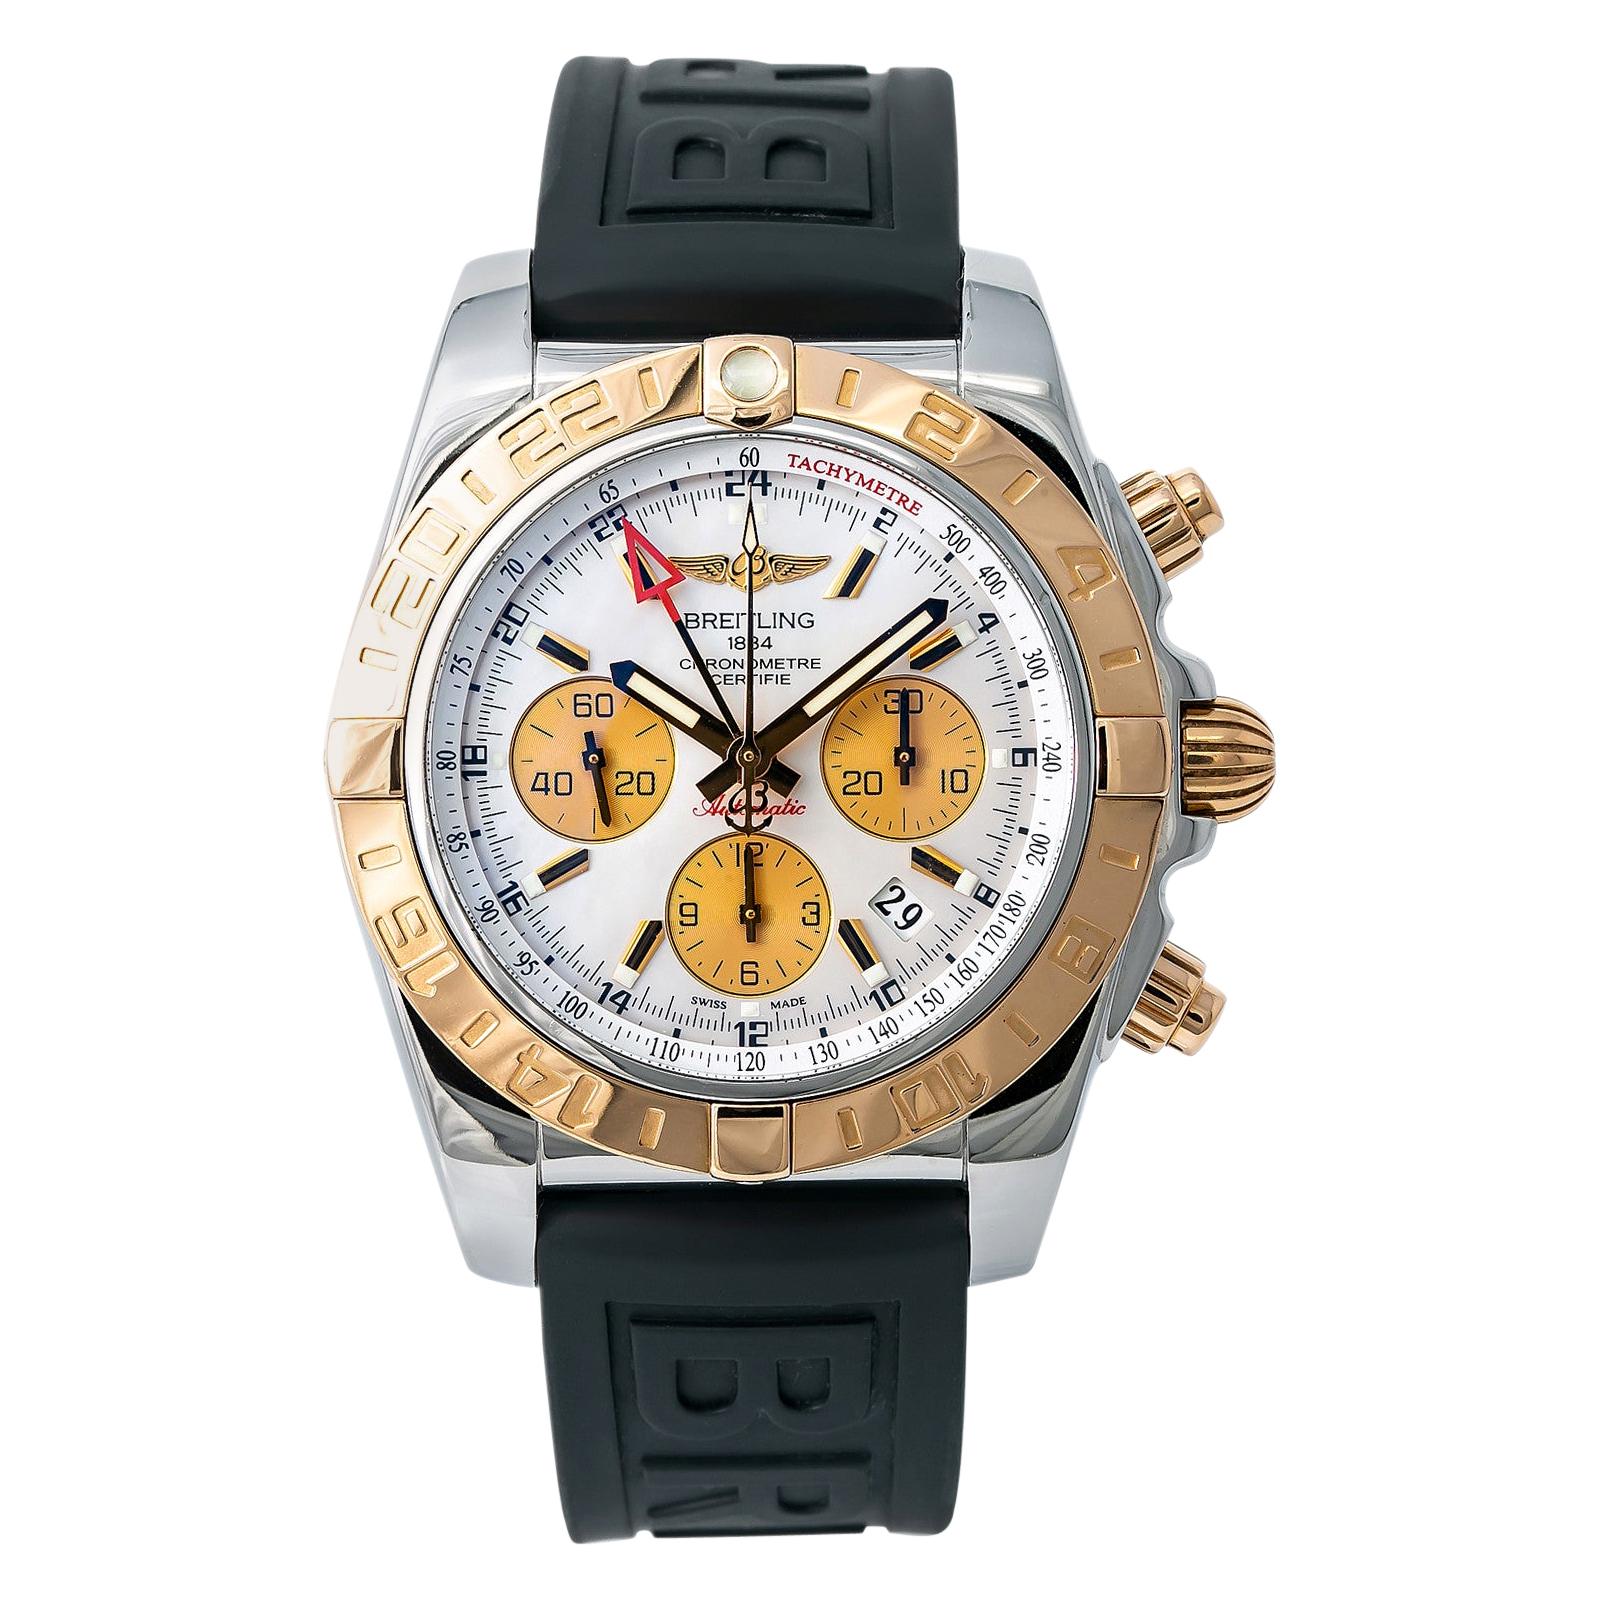 Breitling Chronomat CB0420, Case, Certified and Warranty For Sale